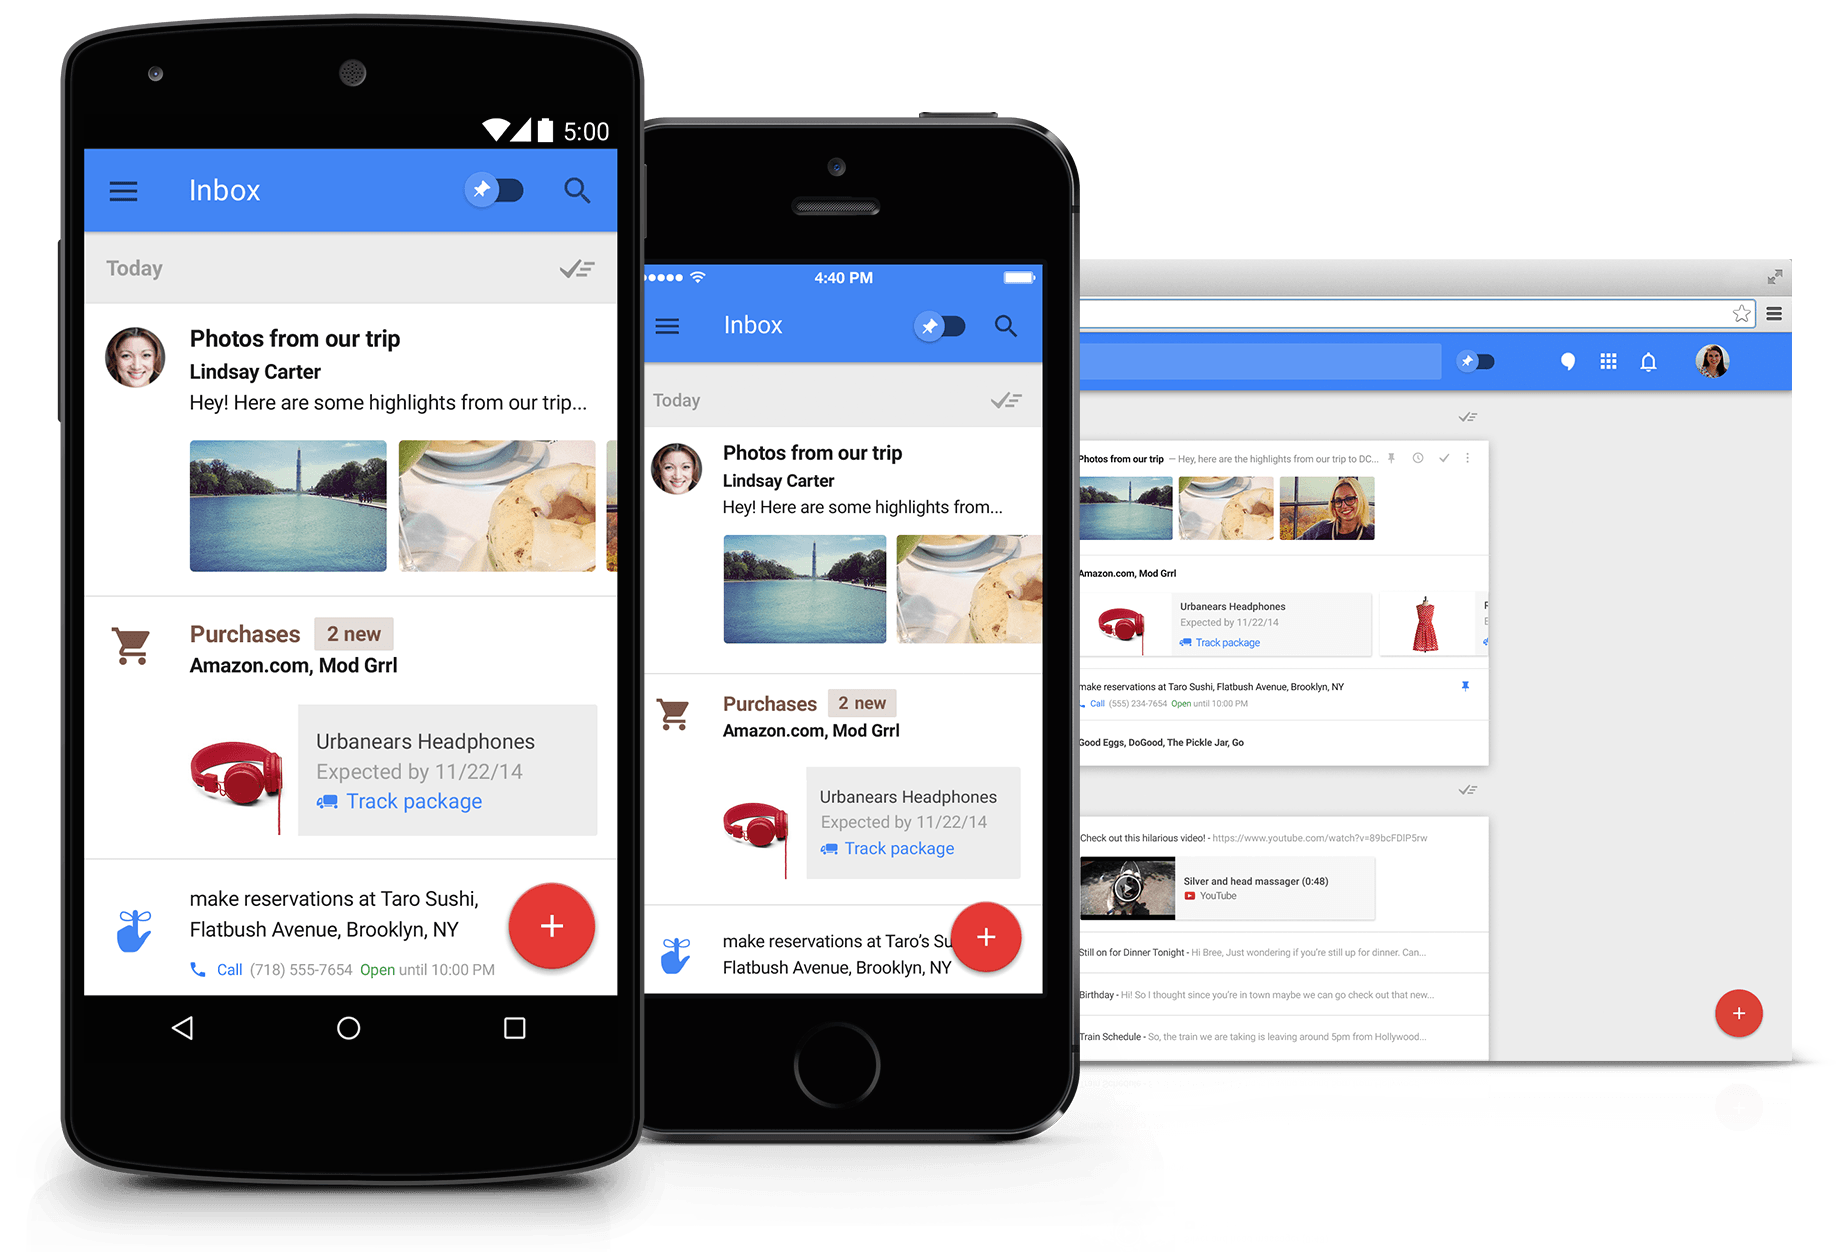 how do i get sent mail off my inbox in gmail